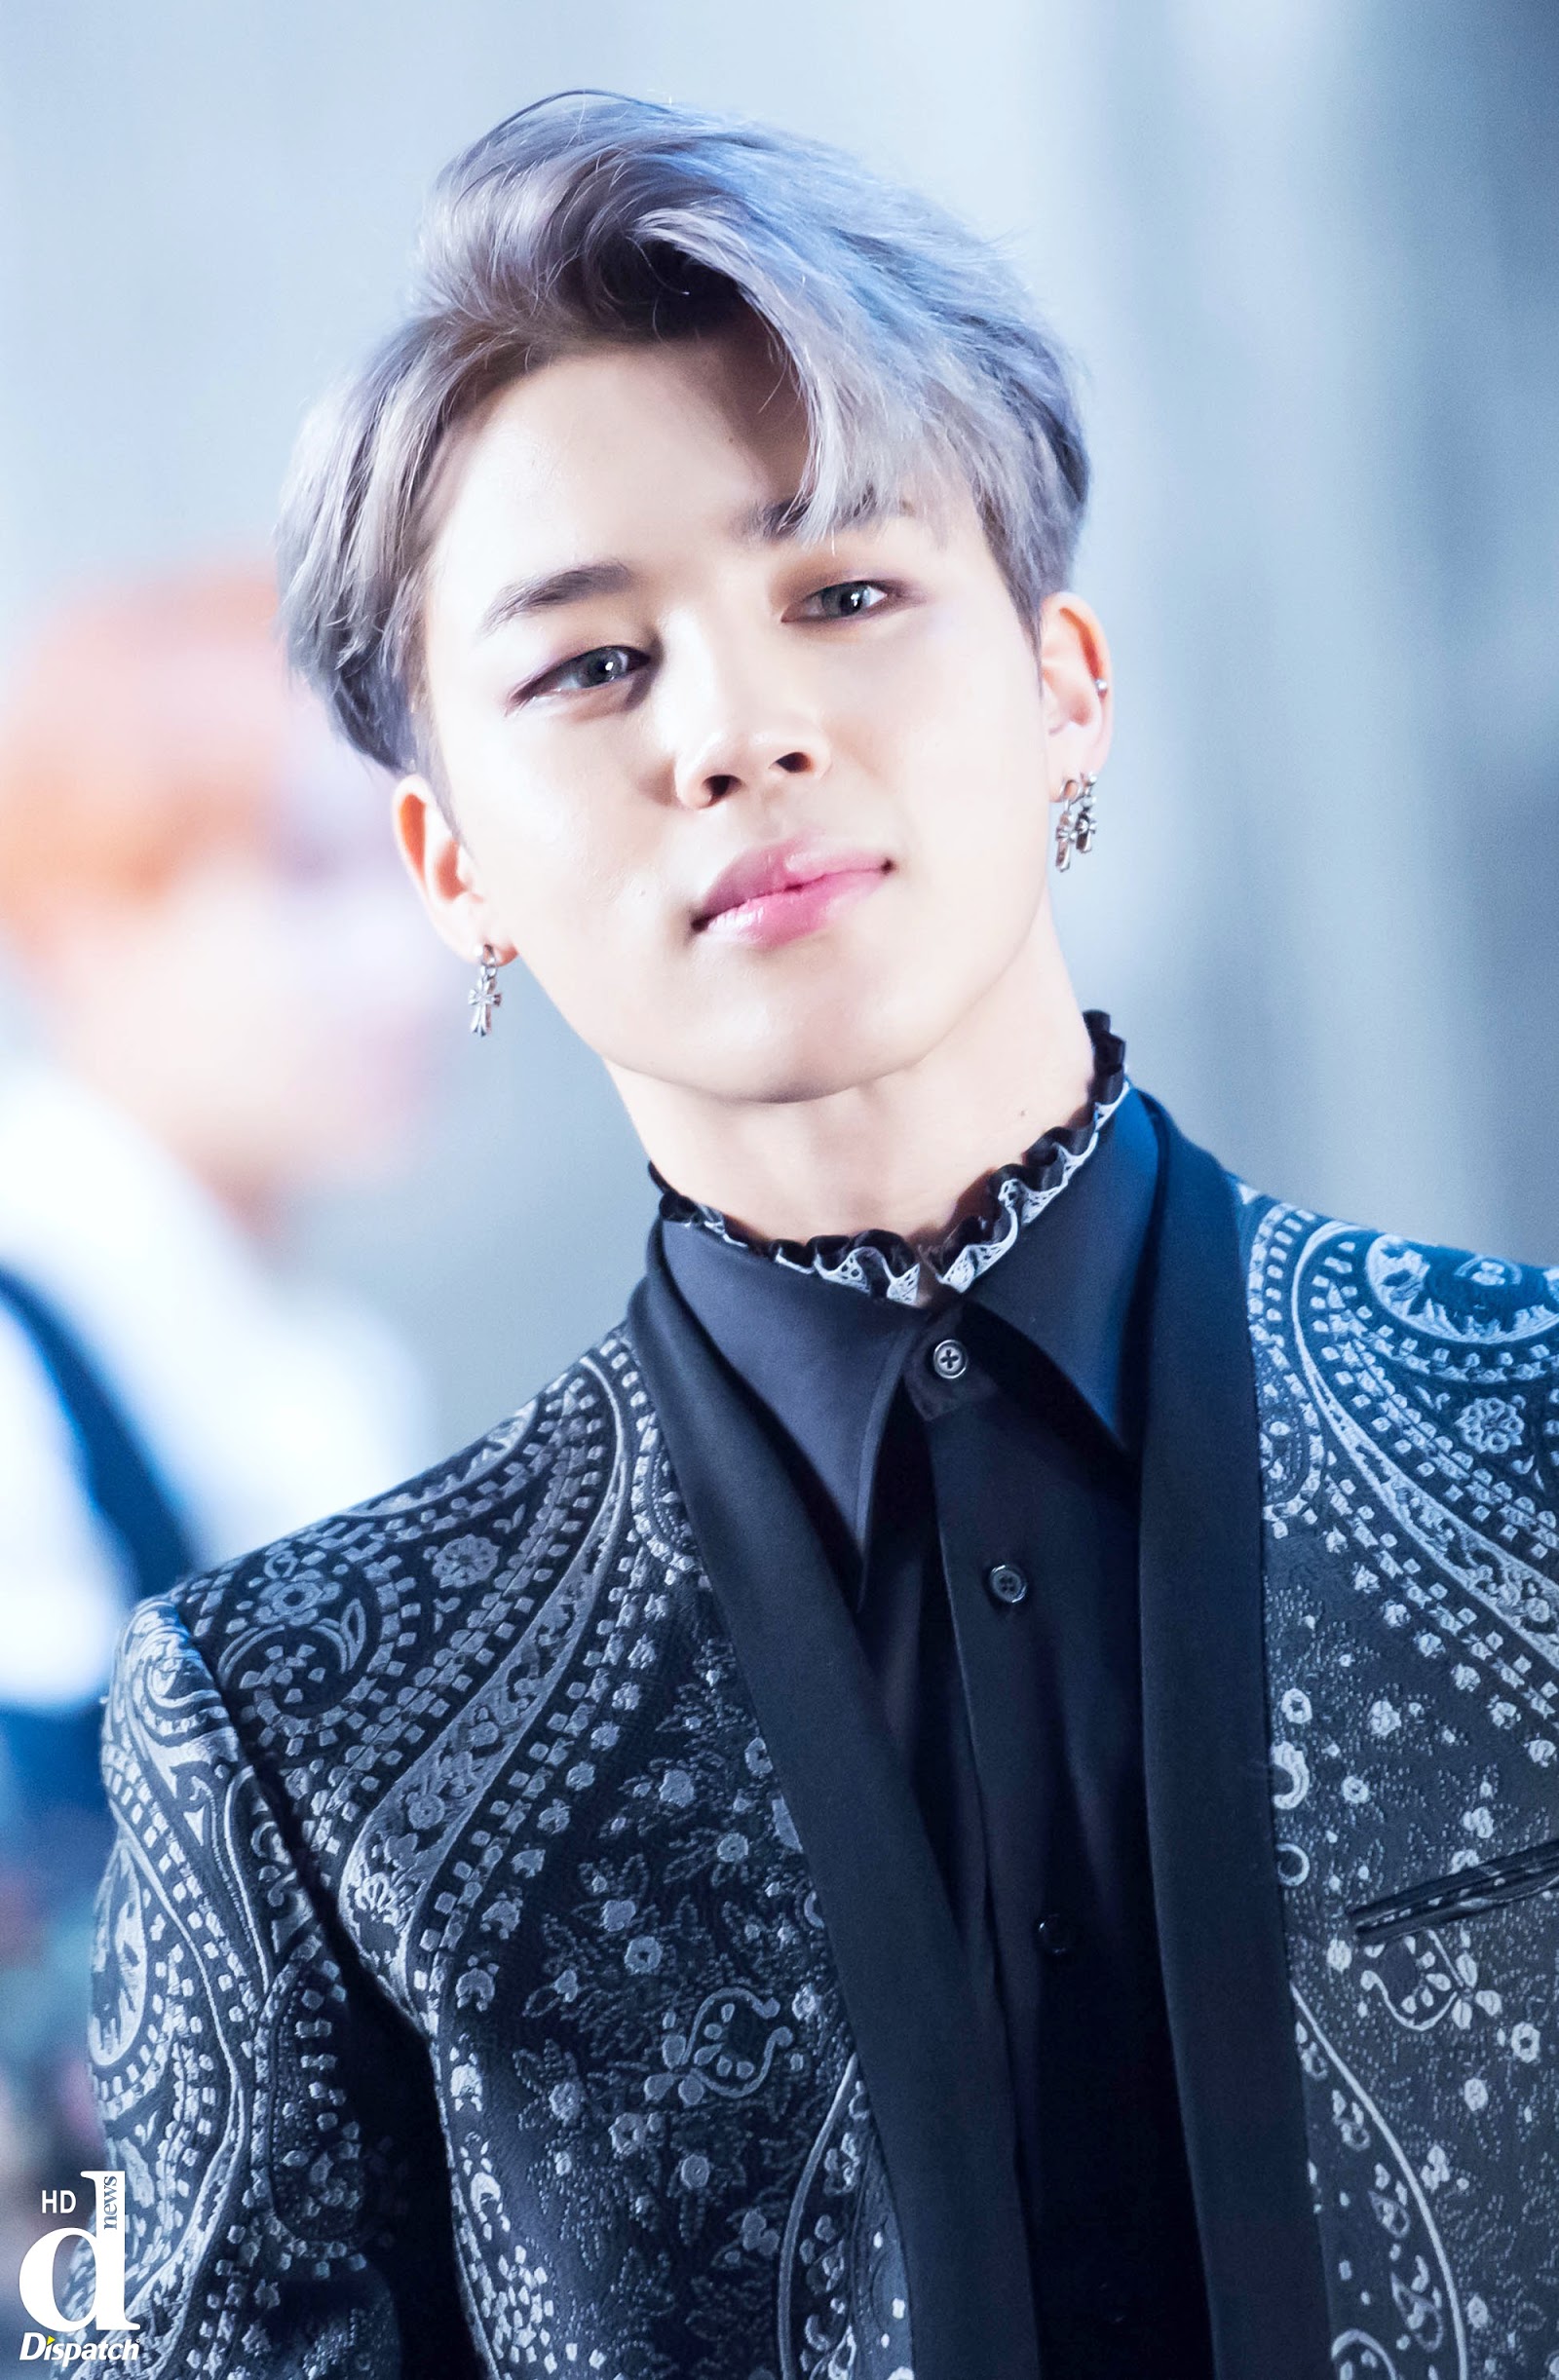 korea-korean-kpop-idol-boy-band-group-BTS-colored-contacts-for-blood-sweat-tears-contact-lenses-jimin-grey-electric-blue-colored-lense-fashion-makeup-guys-kpopstuff